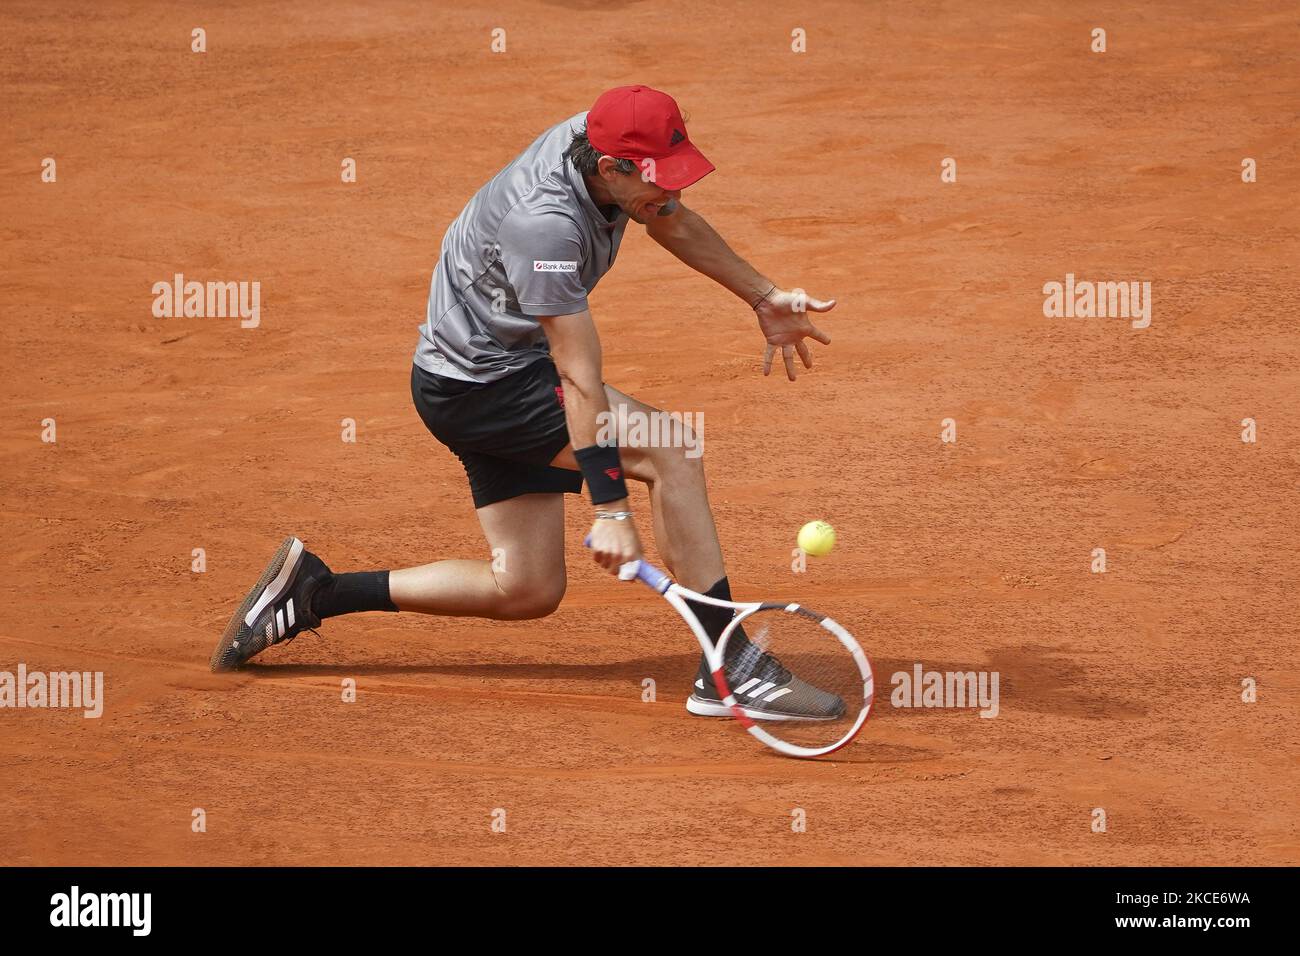 Dominic Thiem of Austria in action during his Men's Singles match,  Semifinals, against Alexander Zverev of Germany on the ATP Masters 1000 -  Mutua Madrid Open 2021 at La Caja Magica on